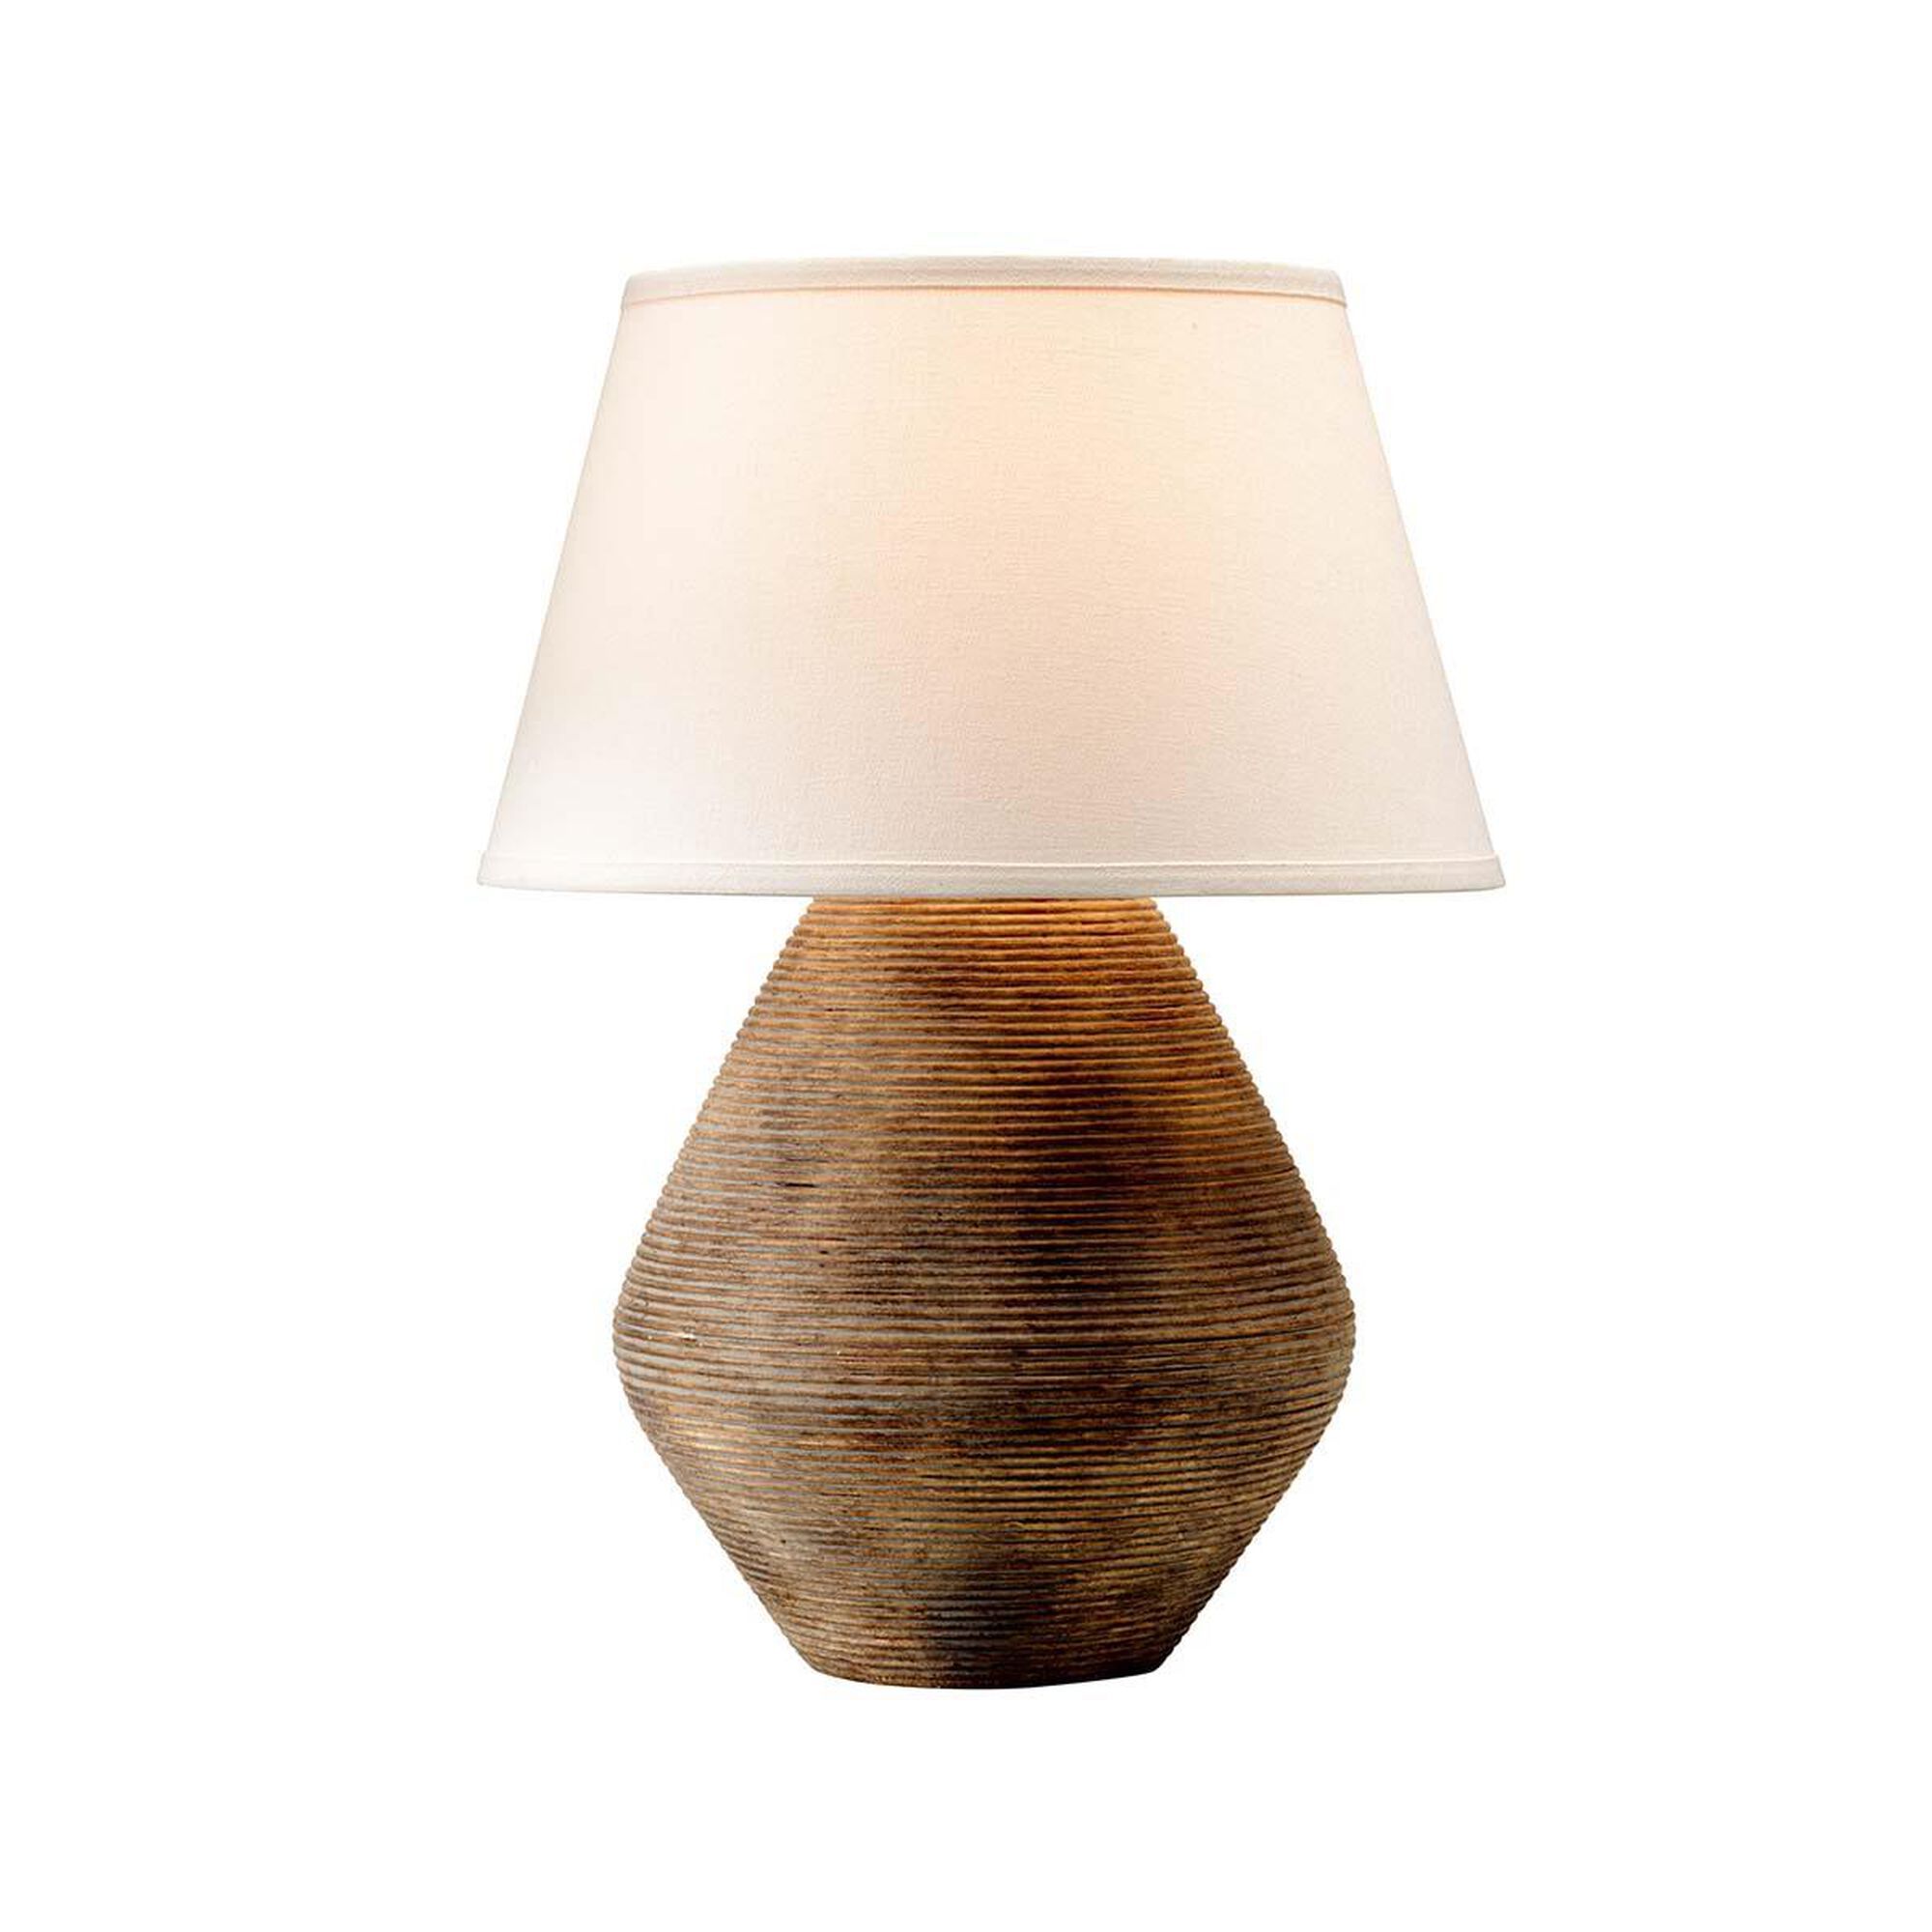 Calabria 22 Inch Table Lamp by Troy Lighting | Capitol Lighting 1800lighting.com